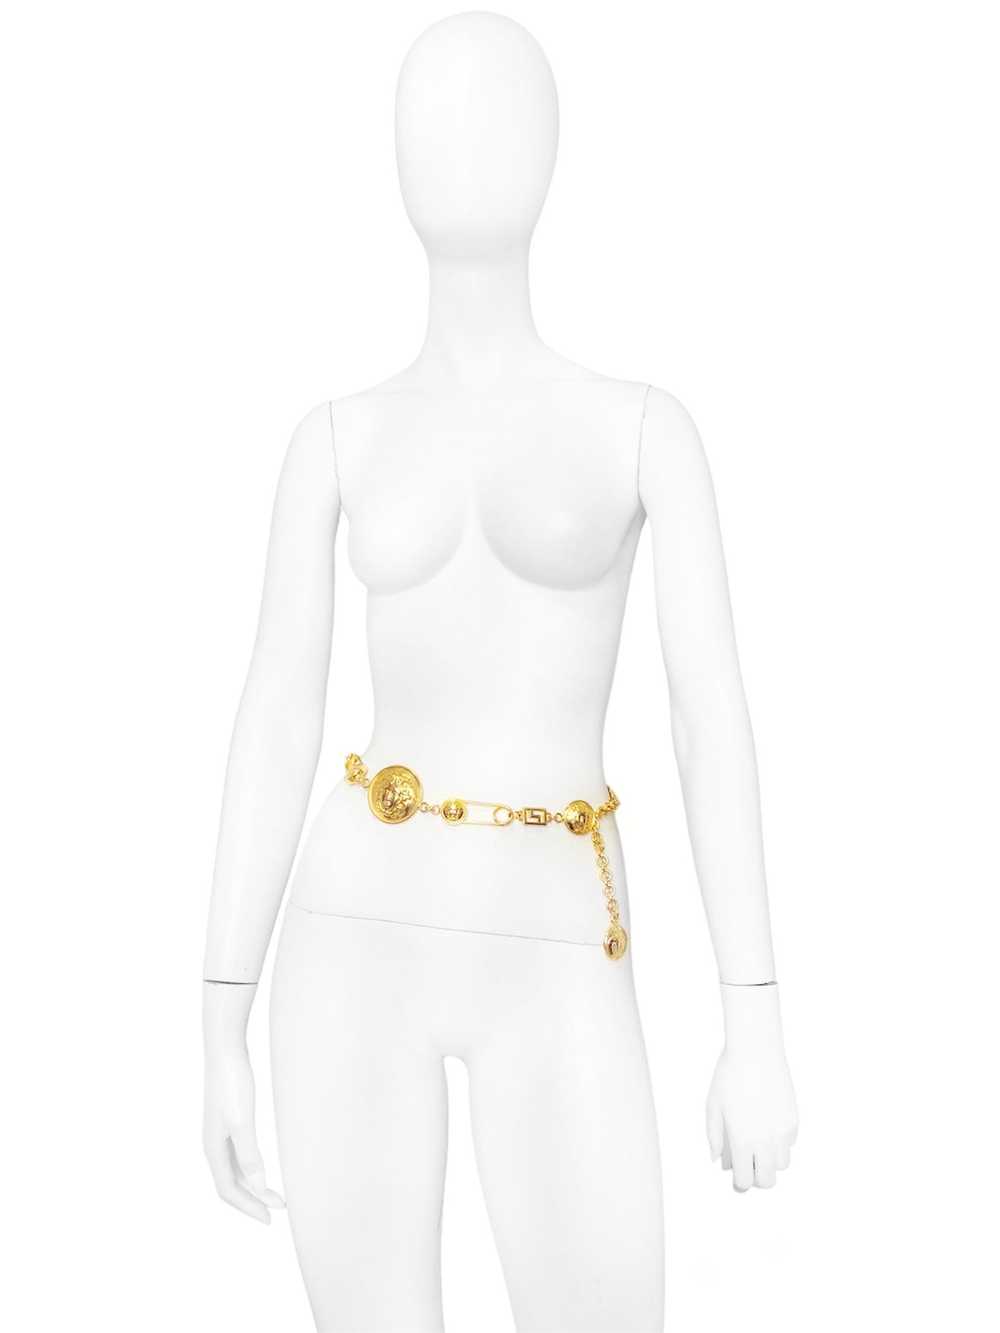 Gianni Versace Iconic Spring 1994 Gold Safety Pin… - image 8